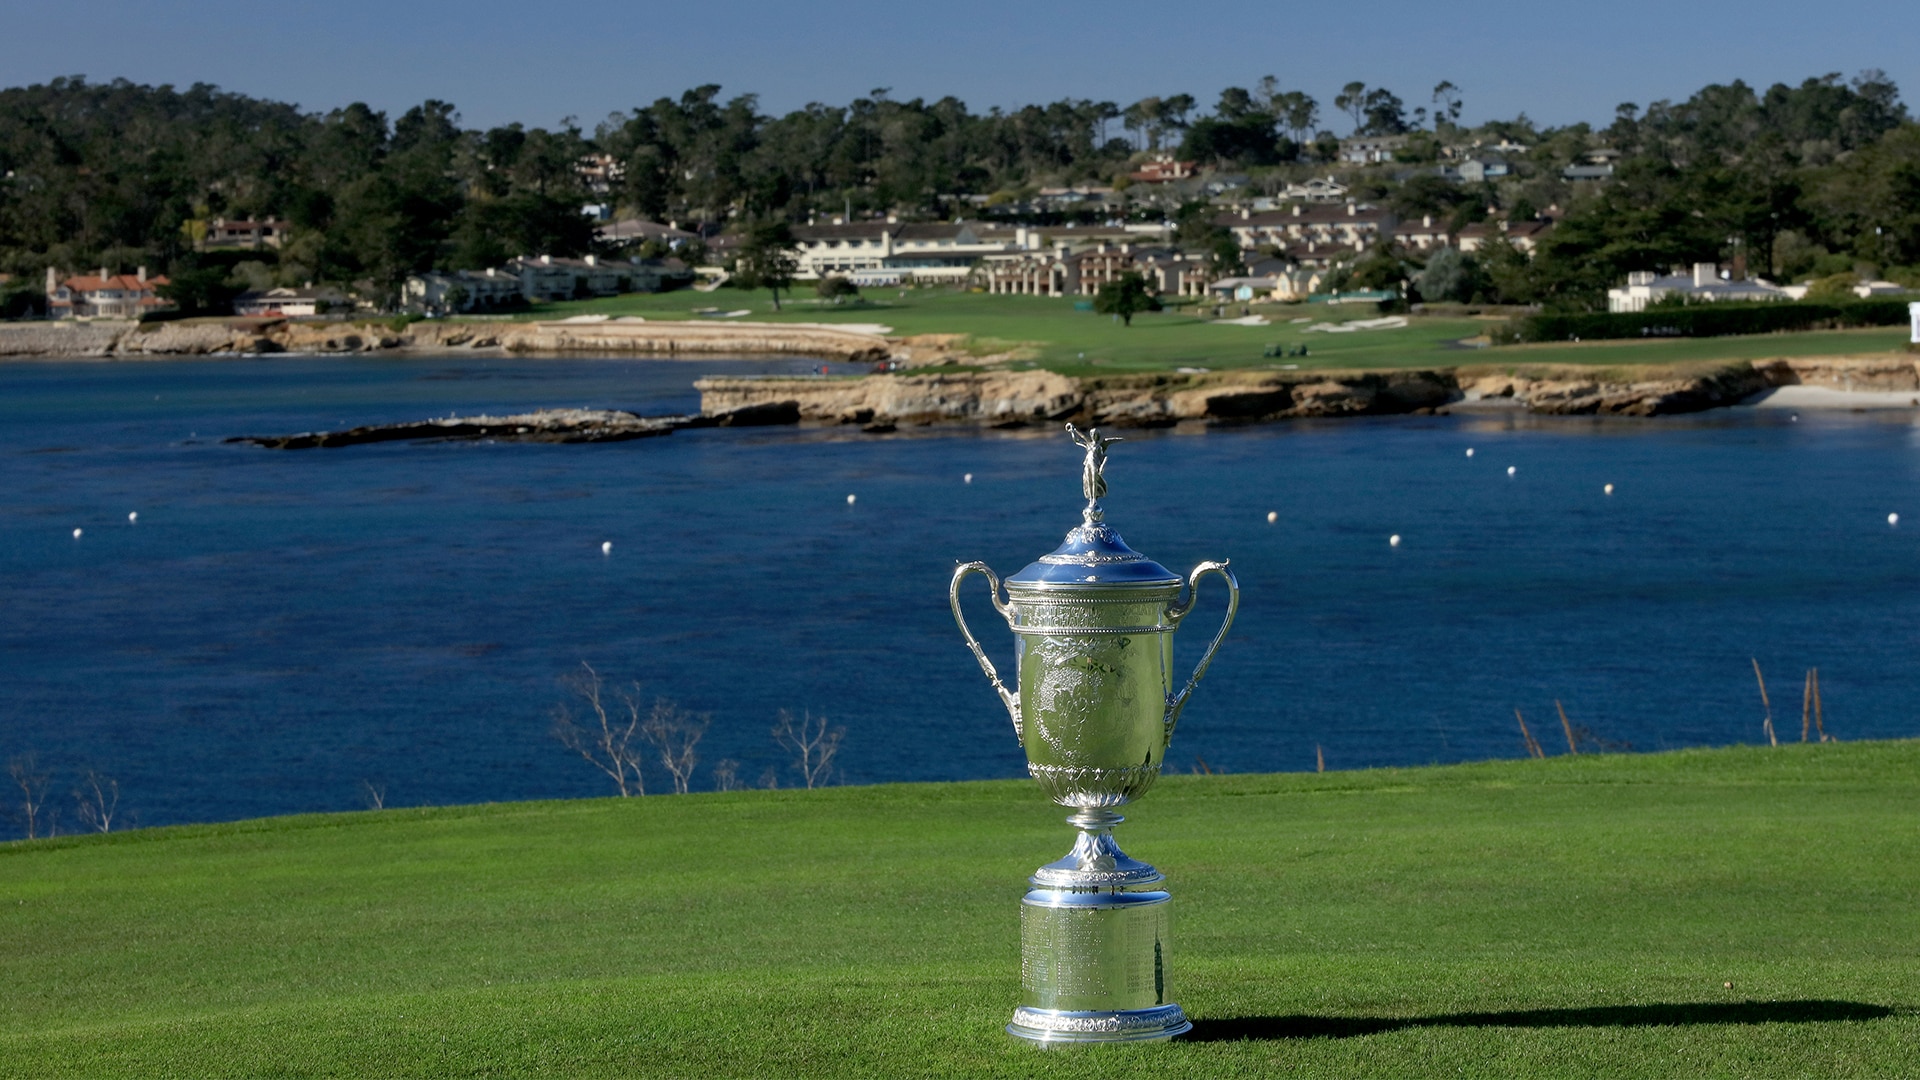 U.S. Women's Open trophy overlooking a pond at the golf course.